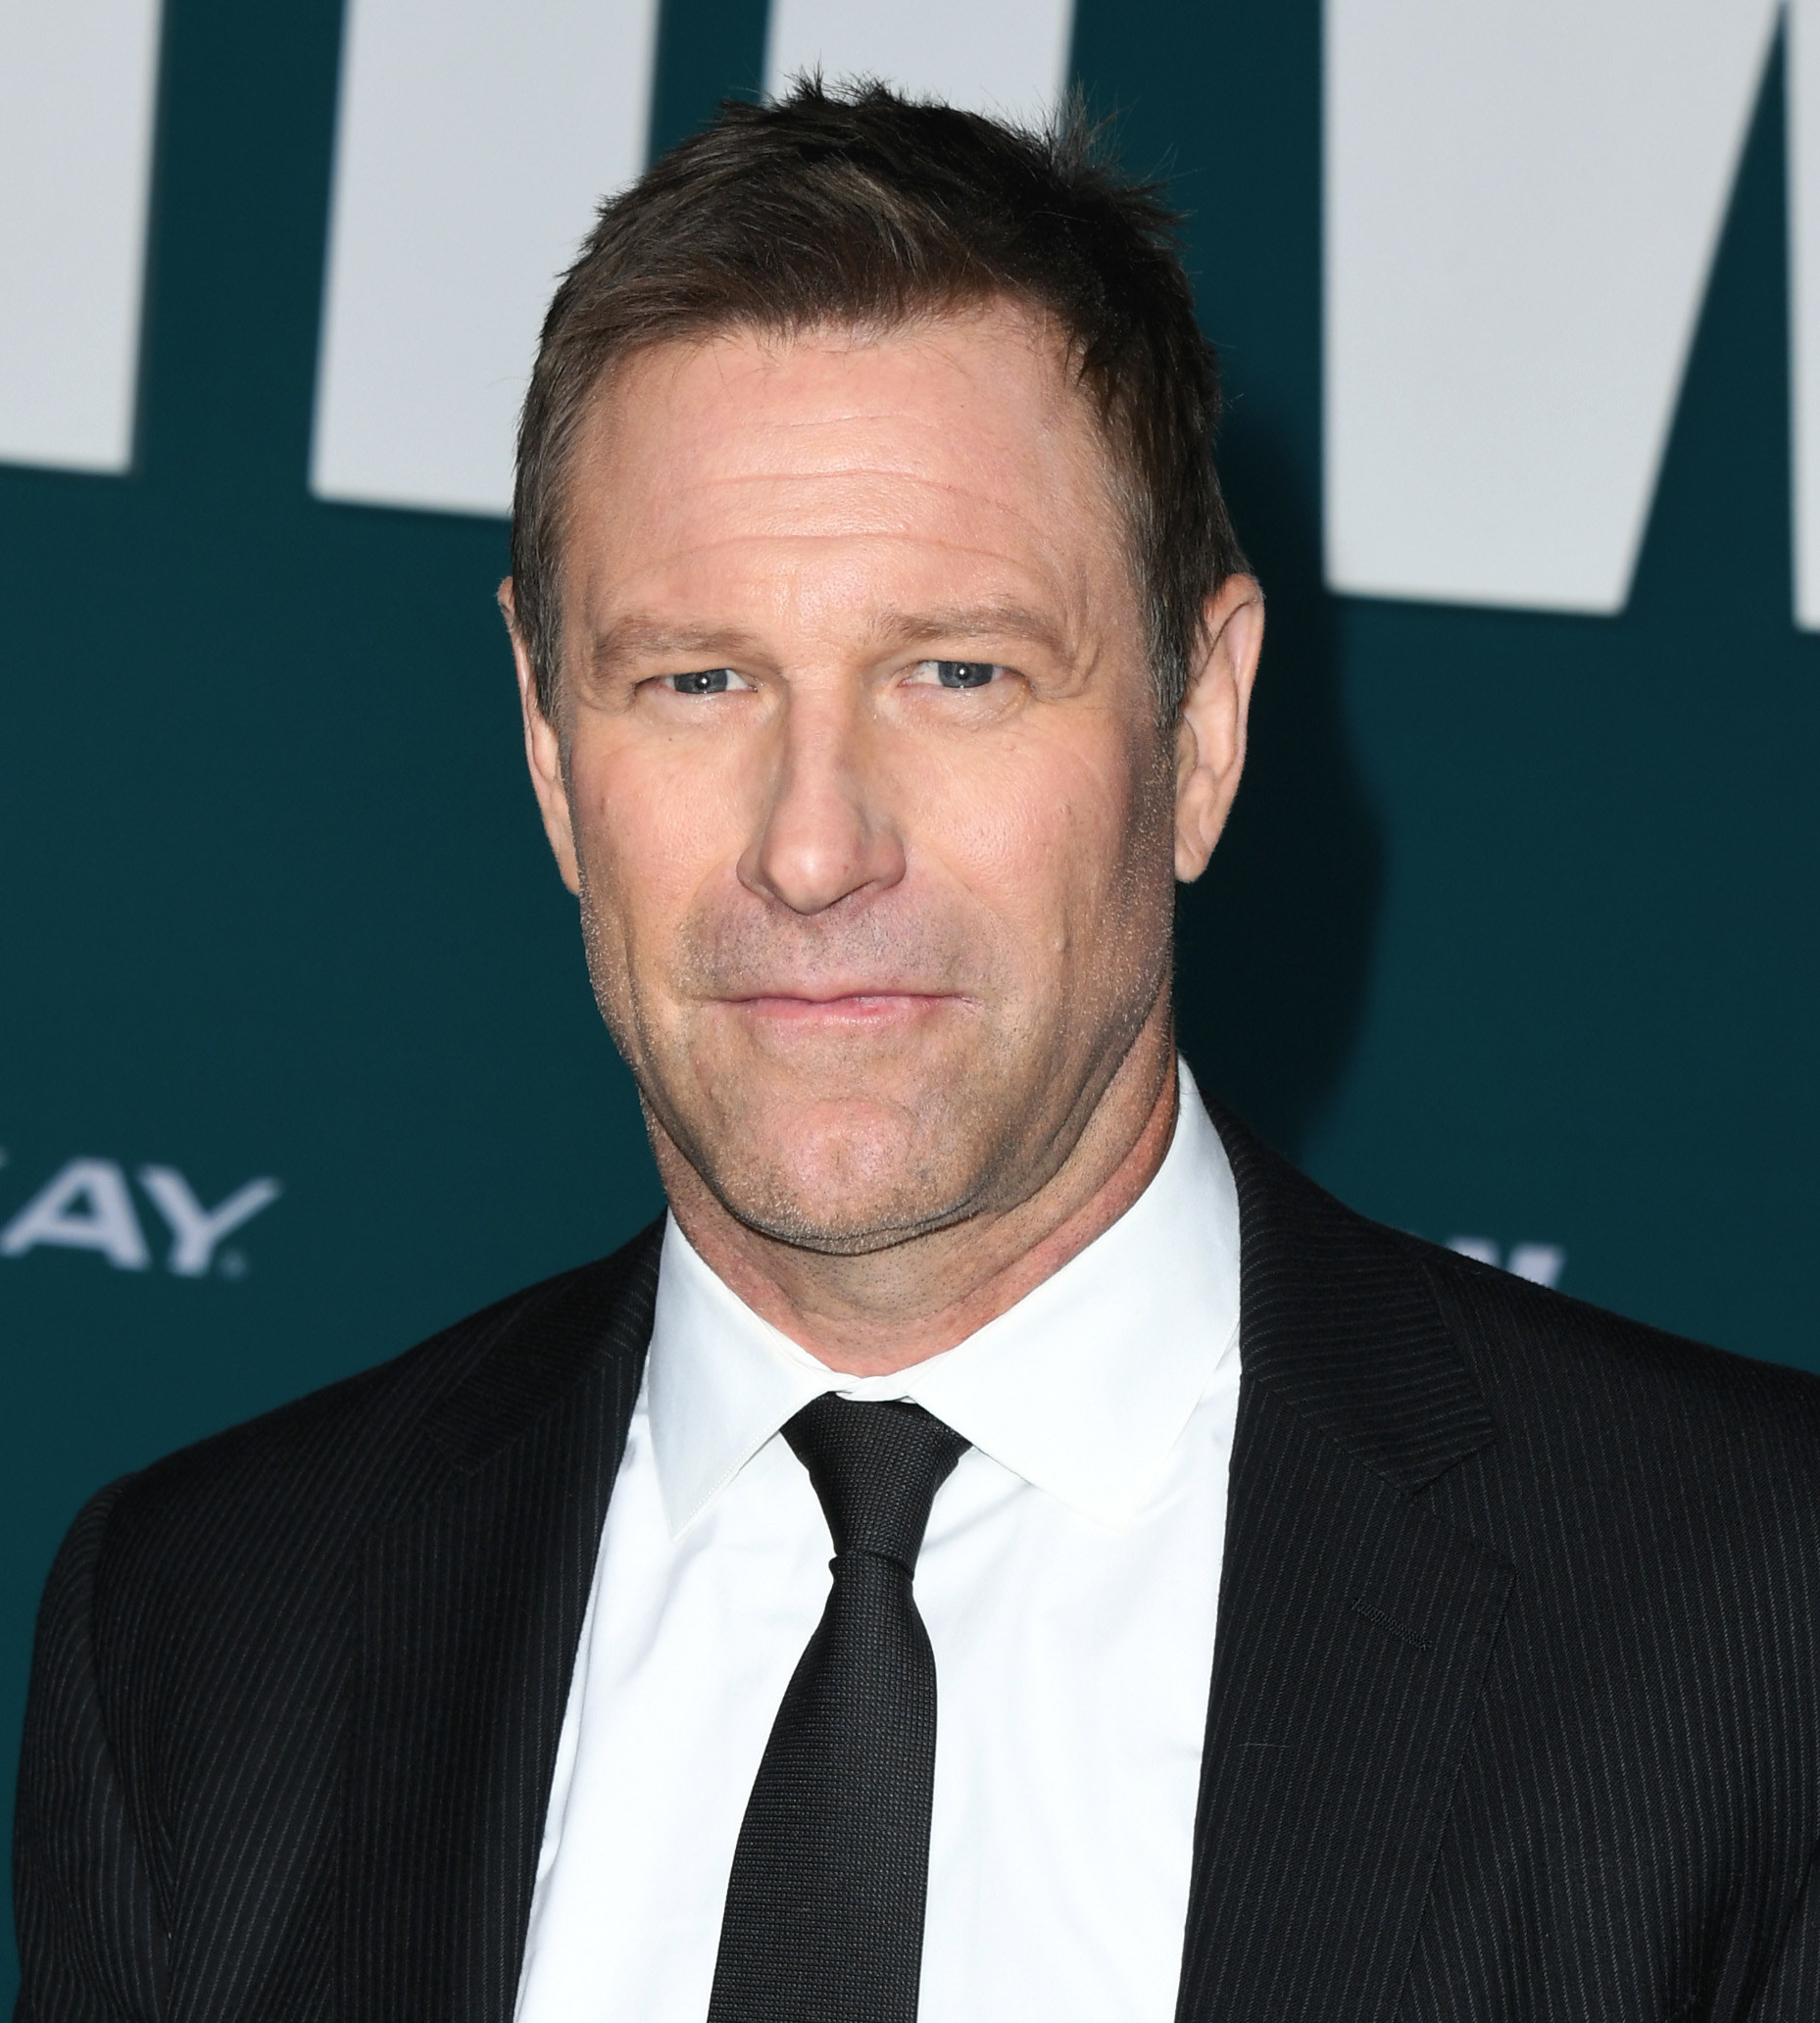 Aaron Eckhart attends the premiere of some film